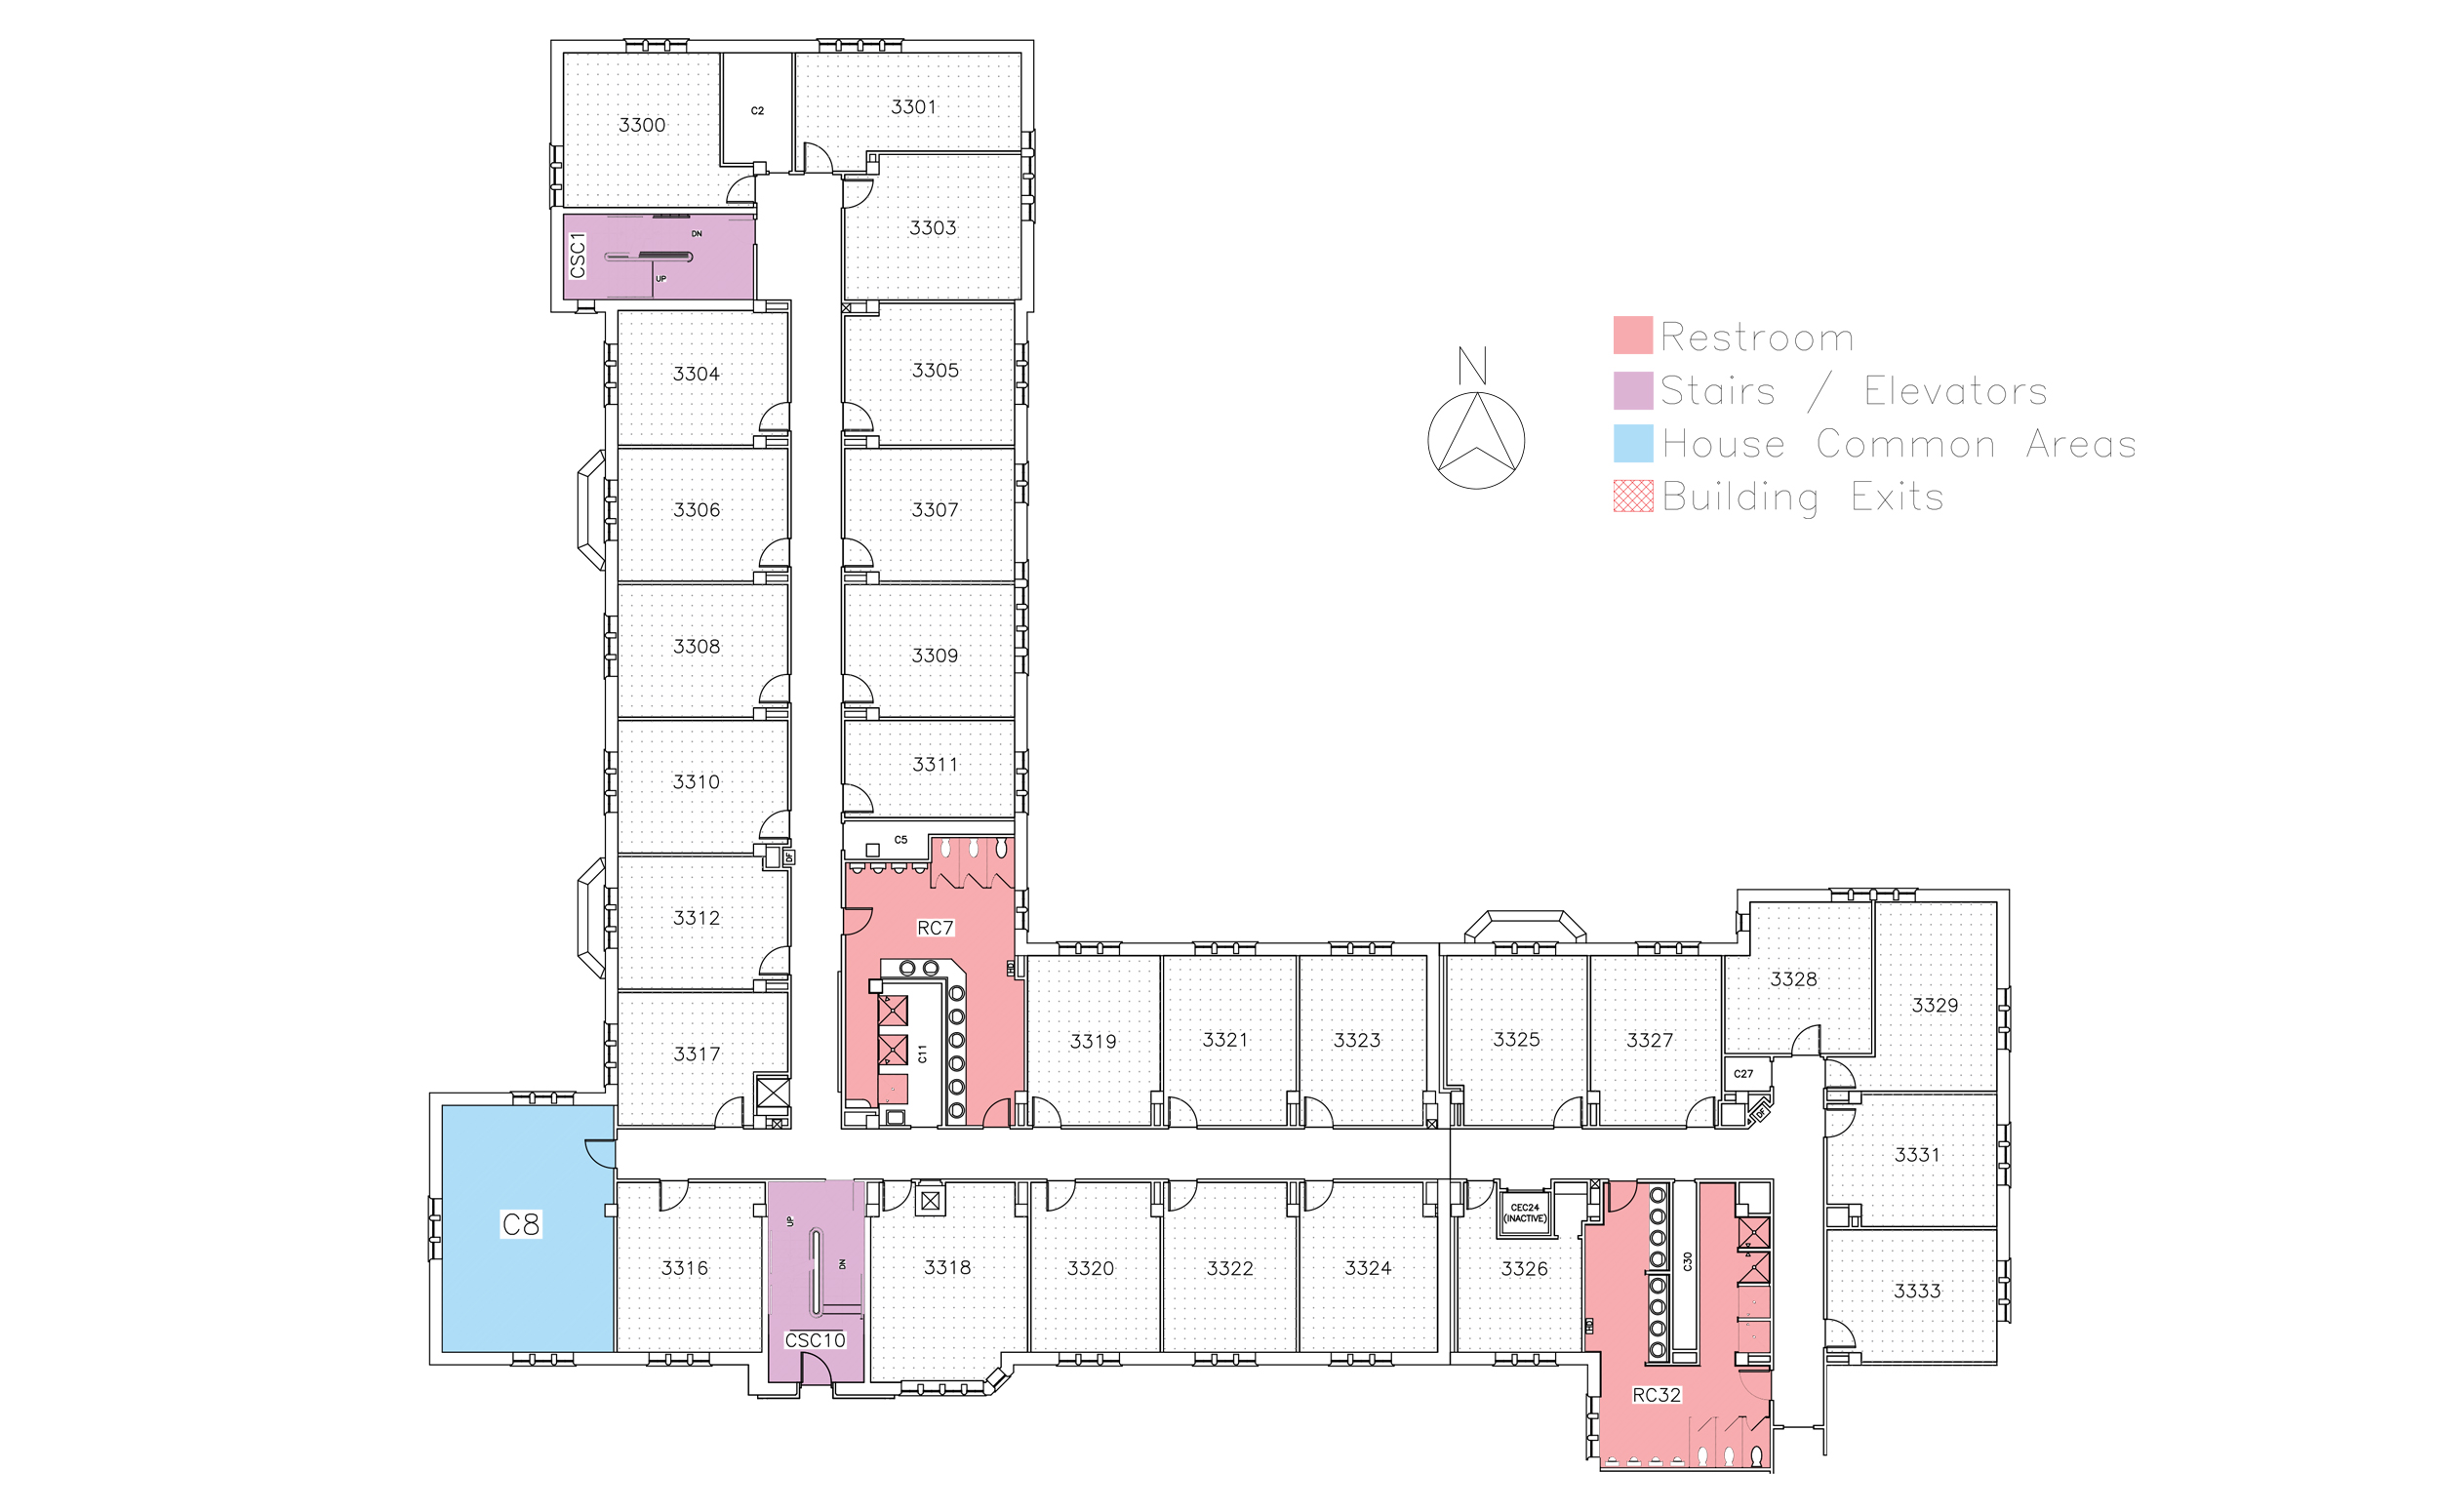 Kimball House, third floor in Friley Hall floor plan. Identifies the location of rooms, bathrooms and common space.